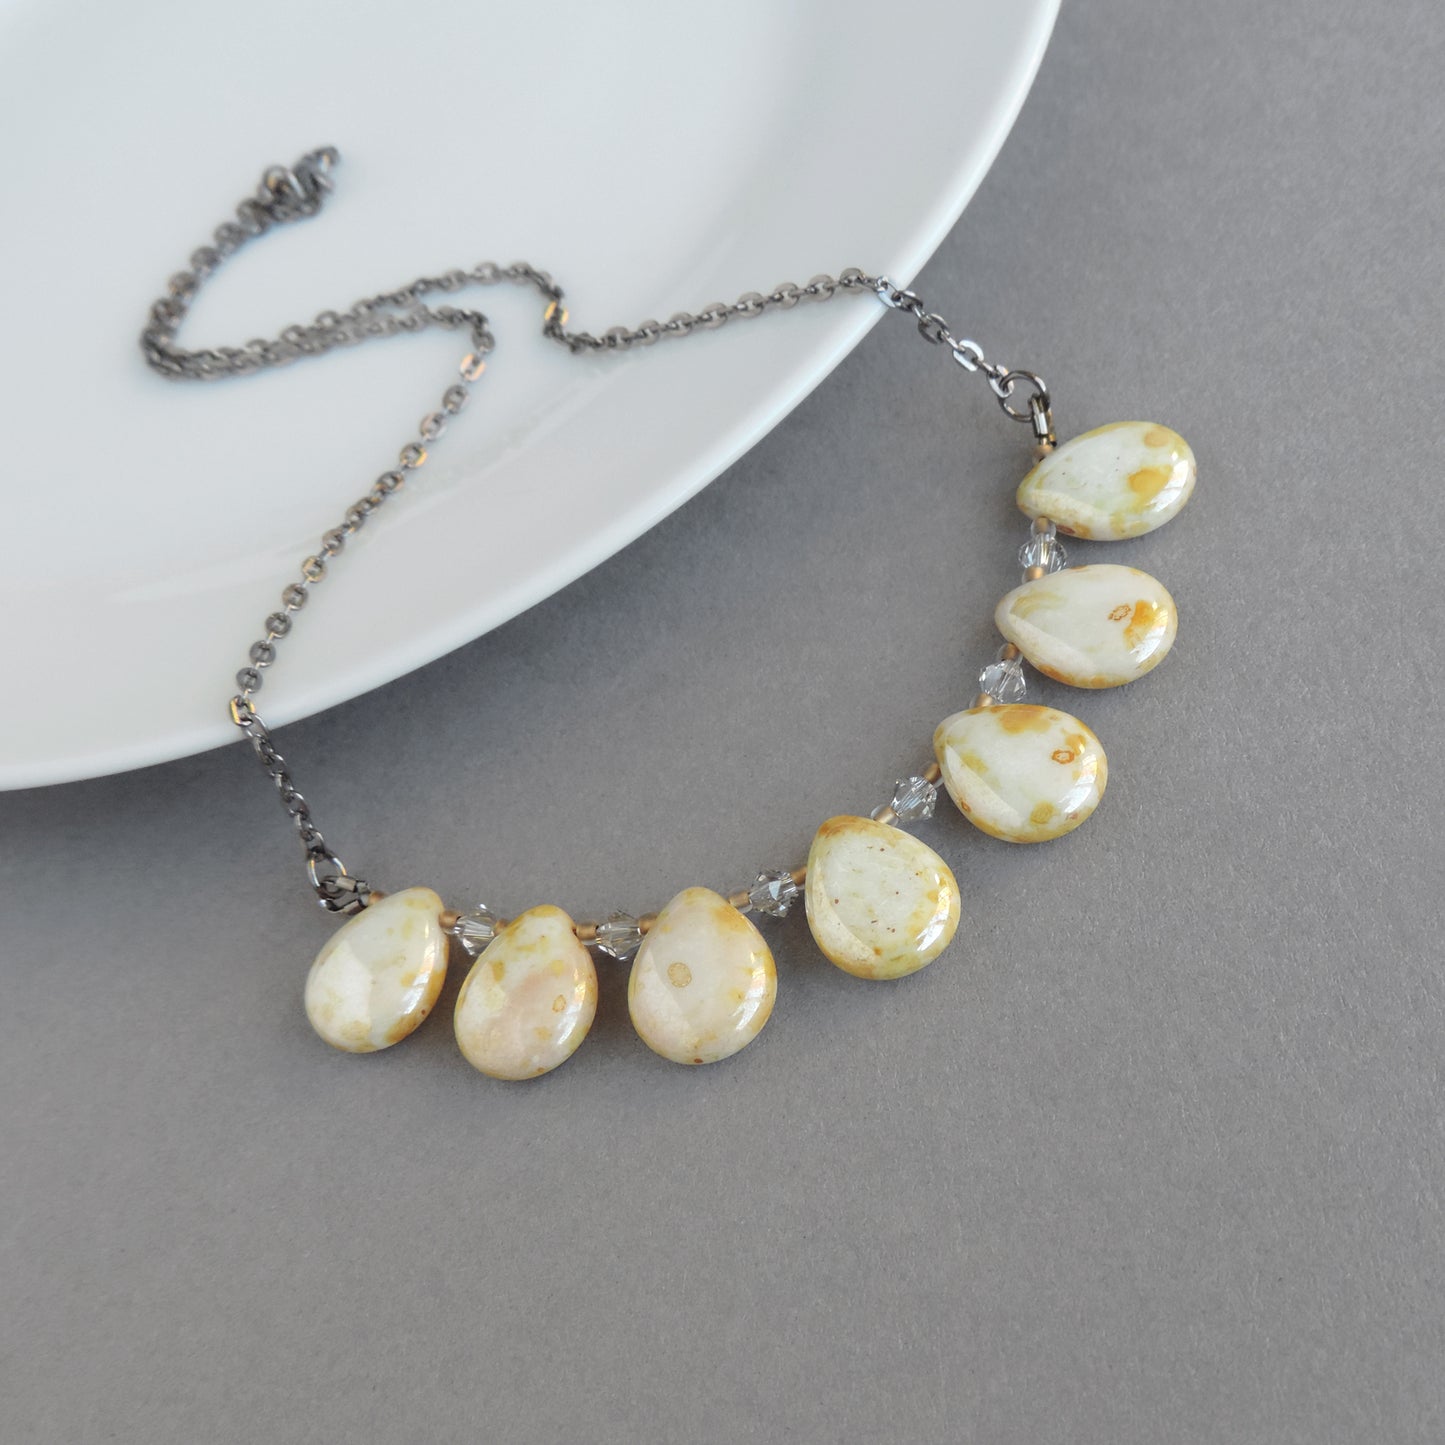 Cream and gold necklace